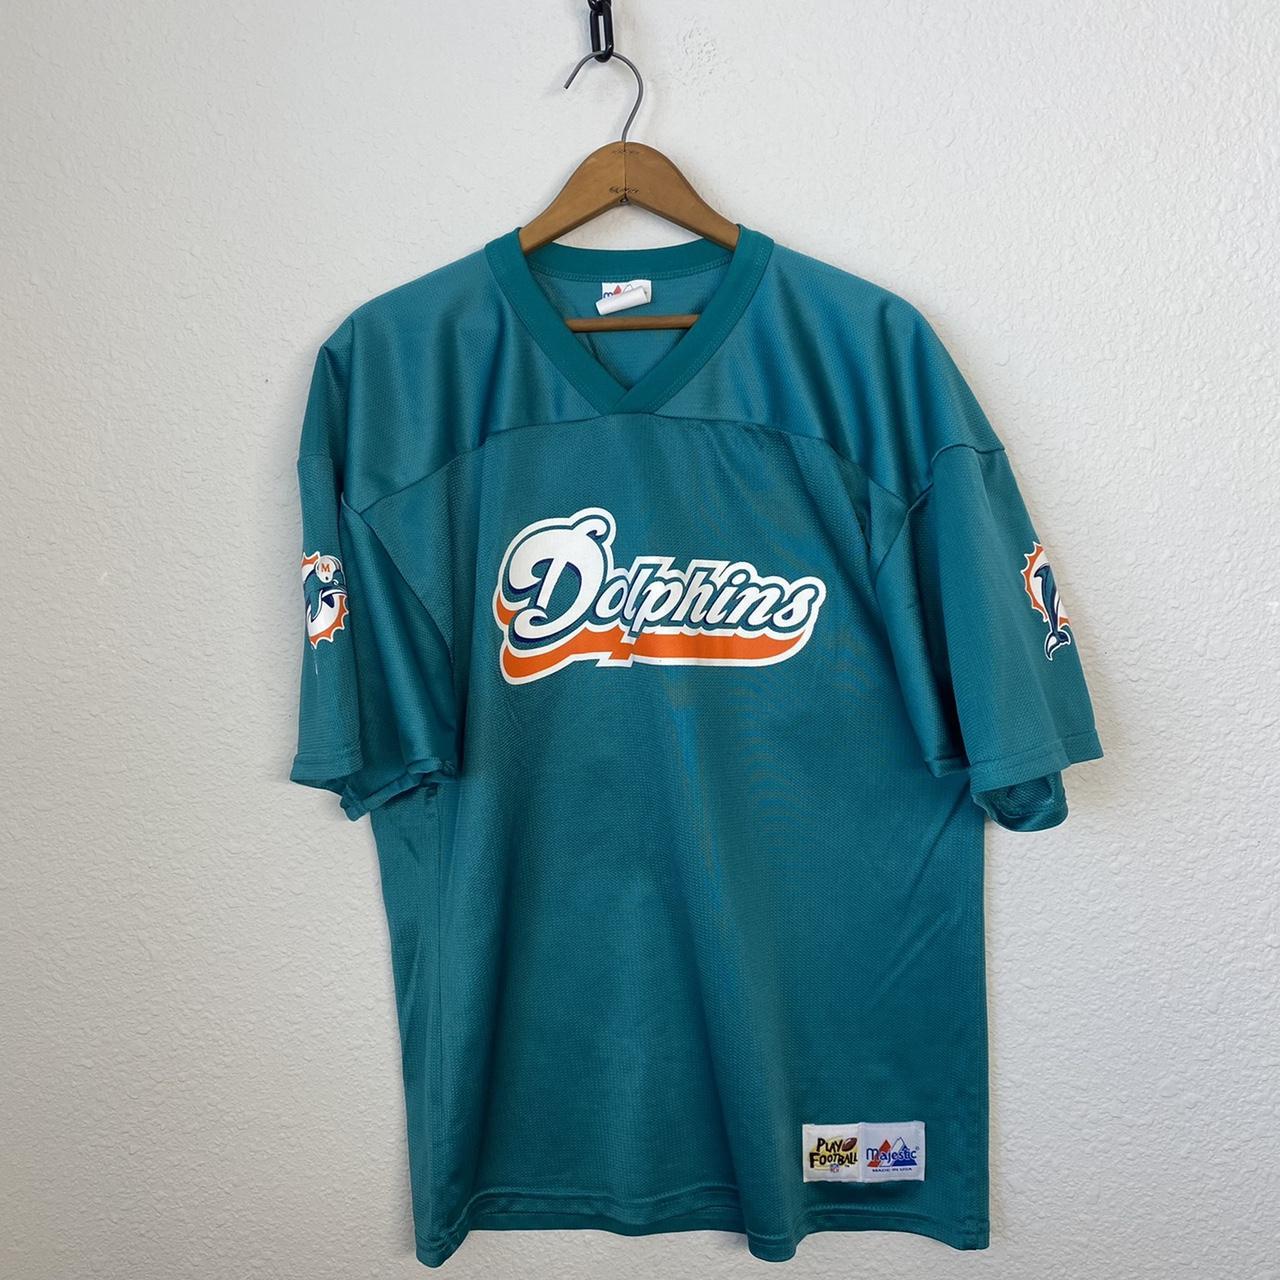 Miami Dolphins Majestic Football Jersey